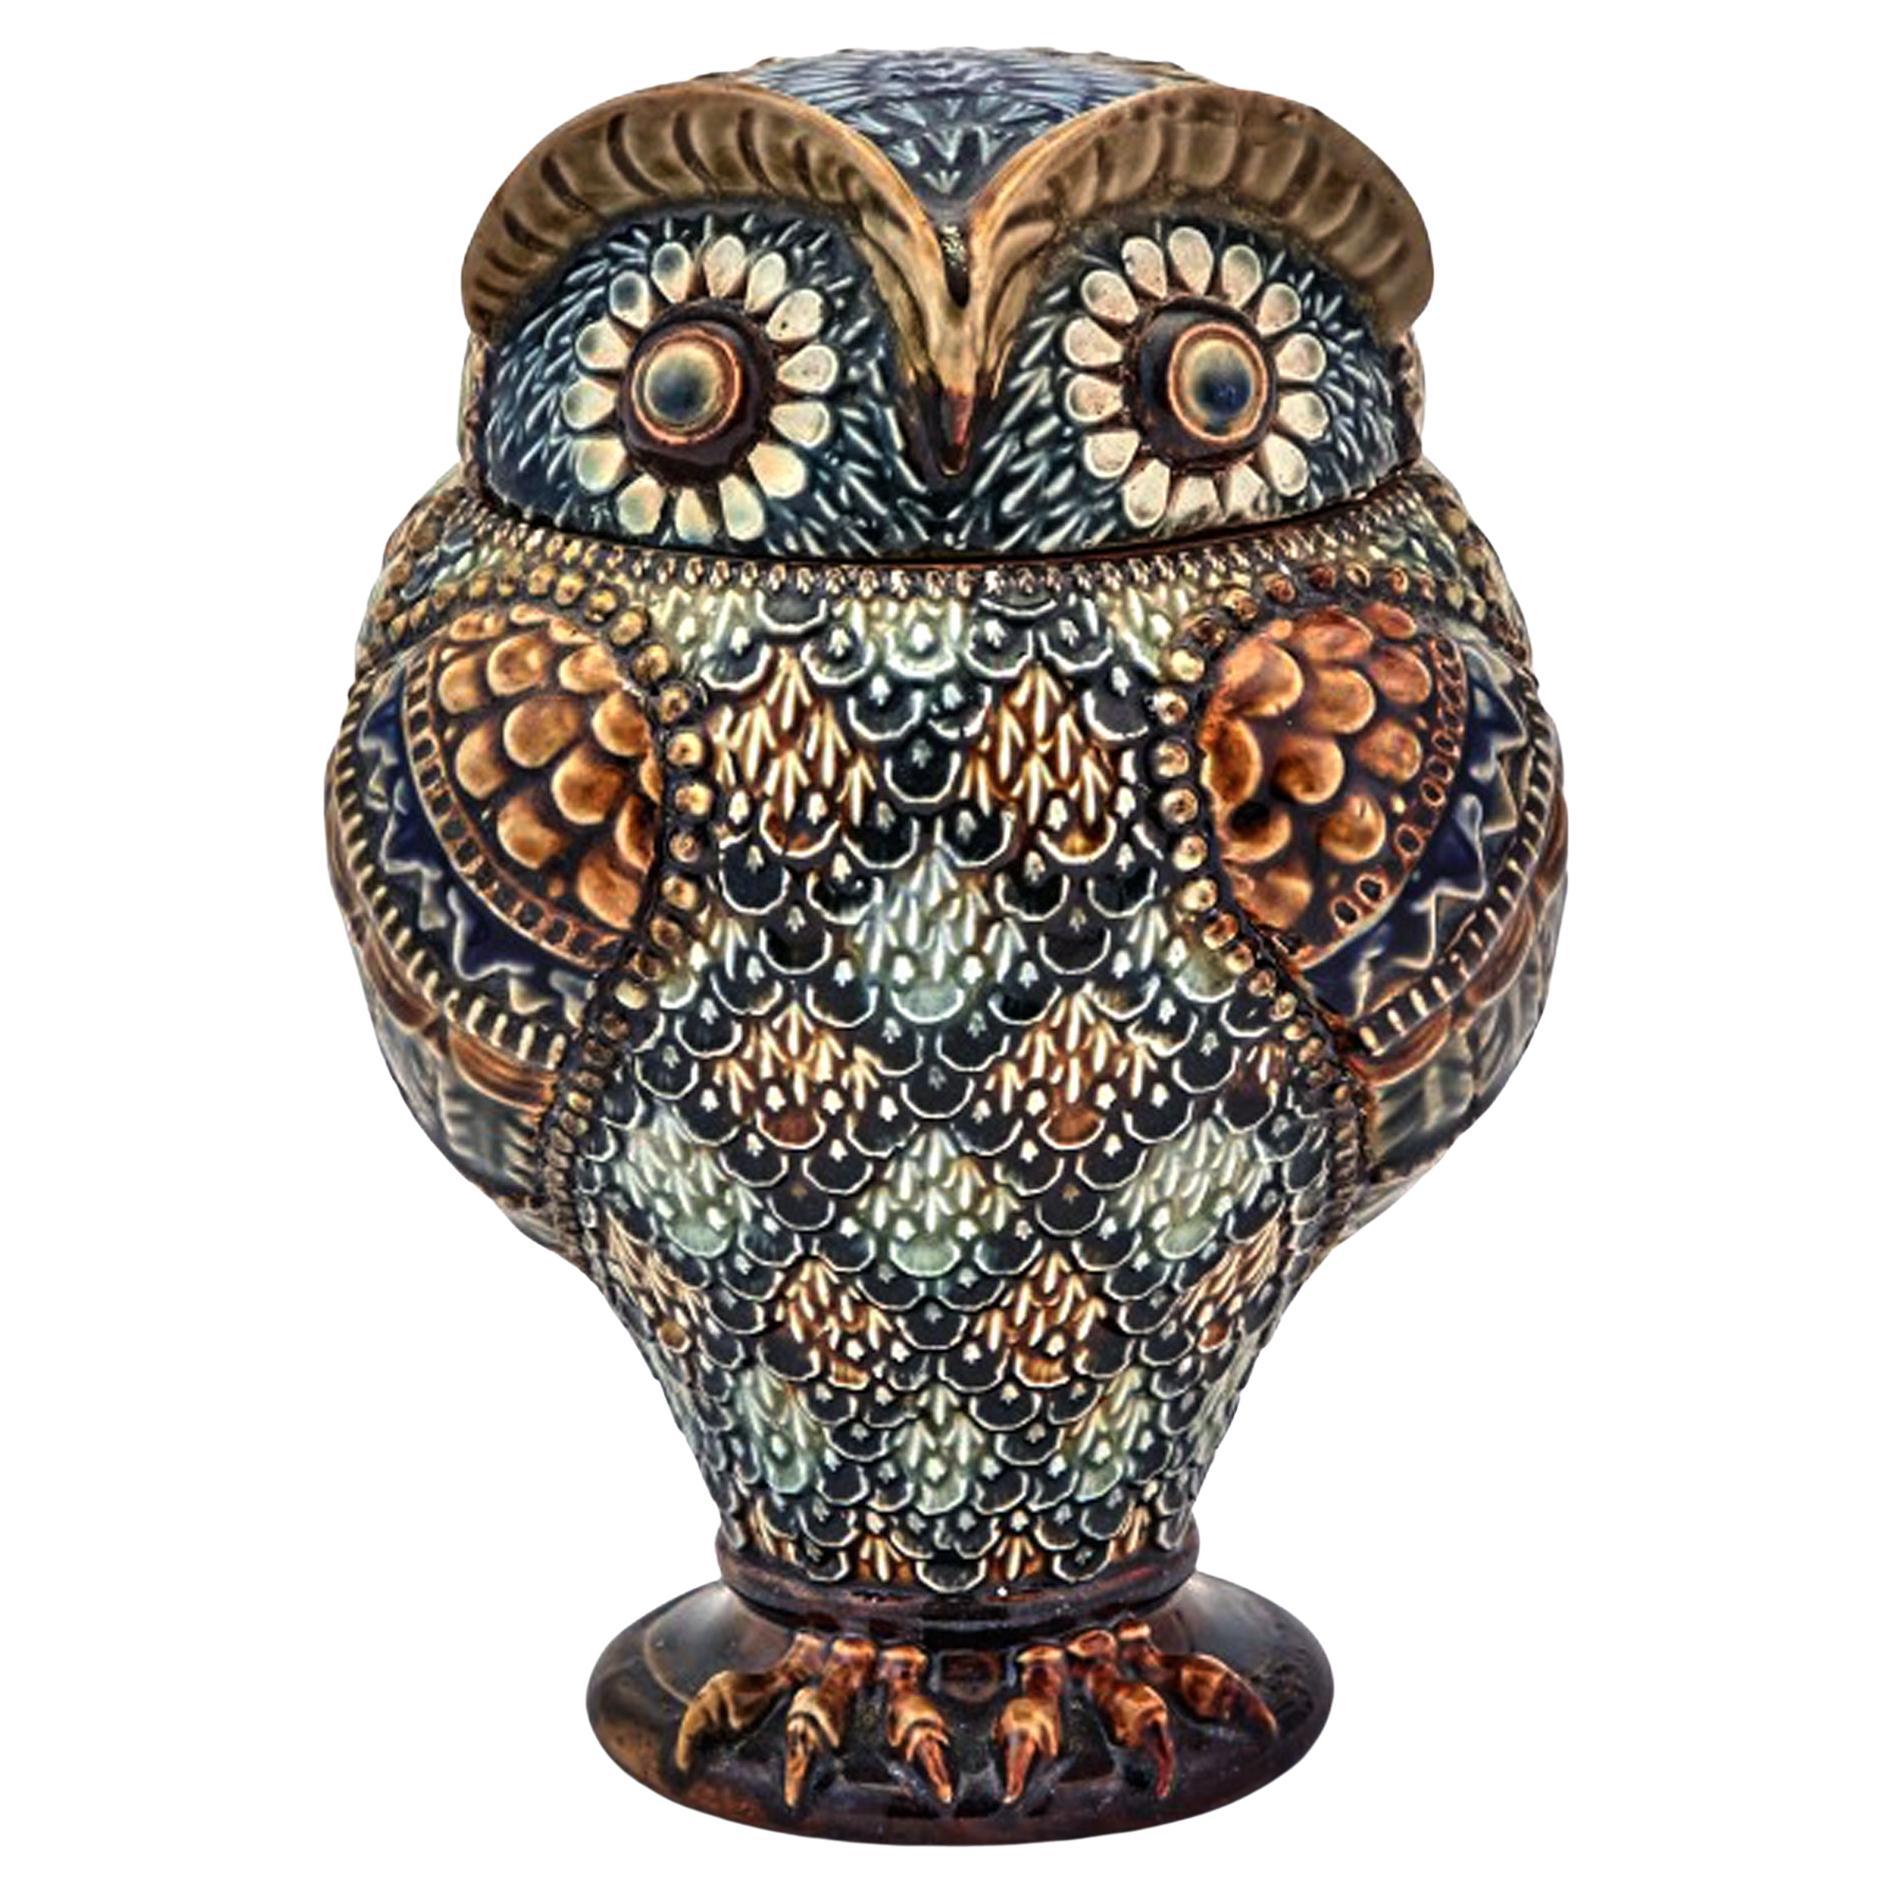 Doulton Stoneware Jar and Cover in Form of an Owl, Marked for Mark V. Marshall